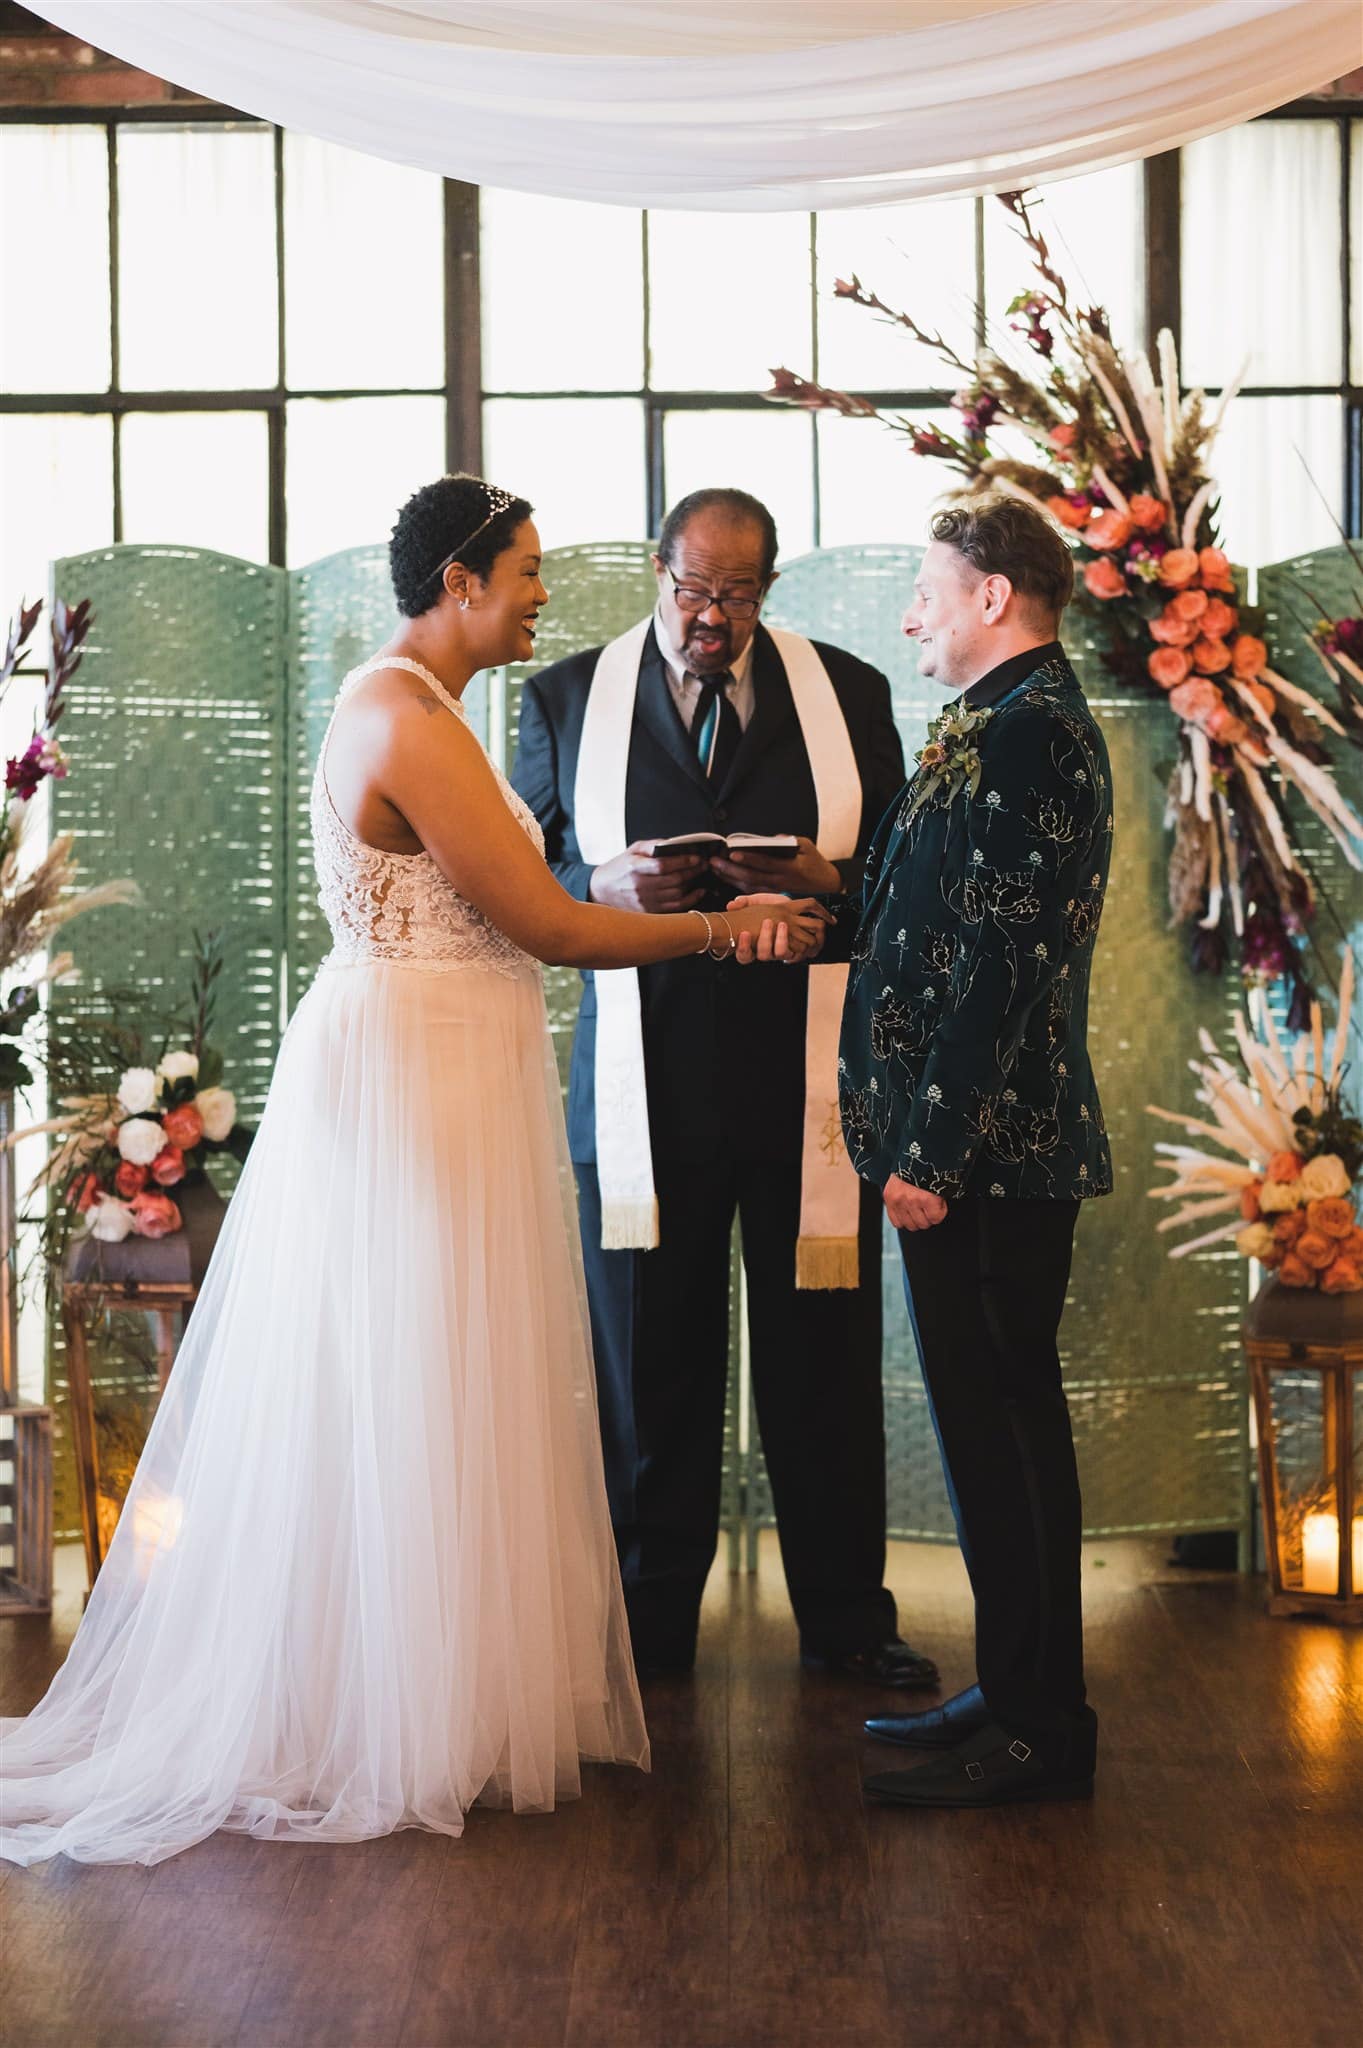 Melody and Steven exchanging vows at their unique and stylish wedding at Trellis 925.